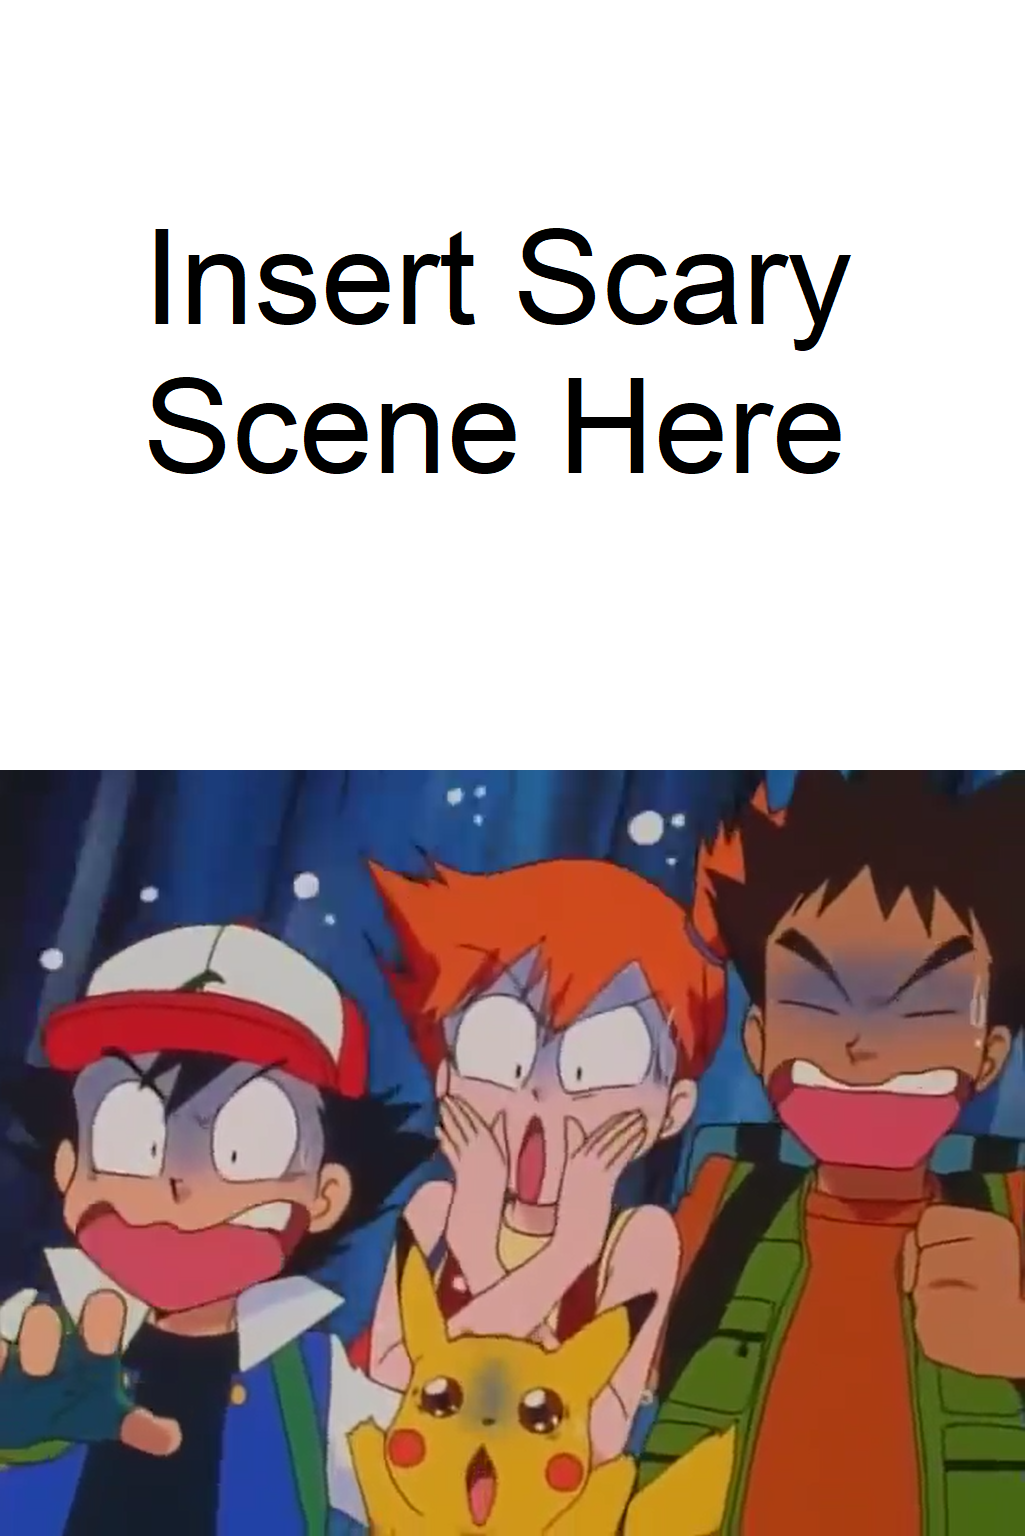 ash and the gang scared of what scary scene Blank Meme Template